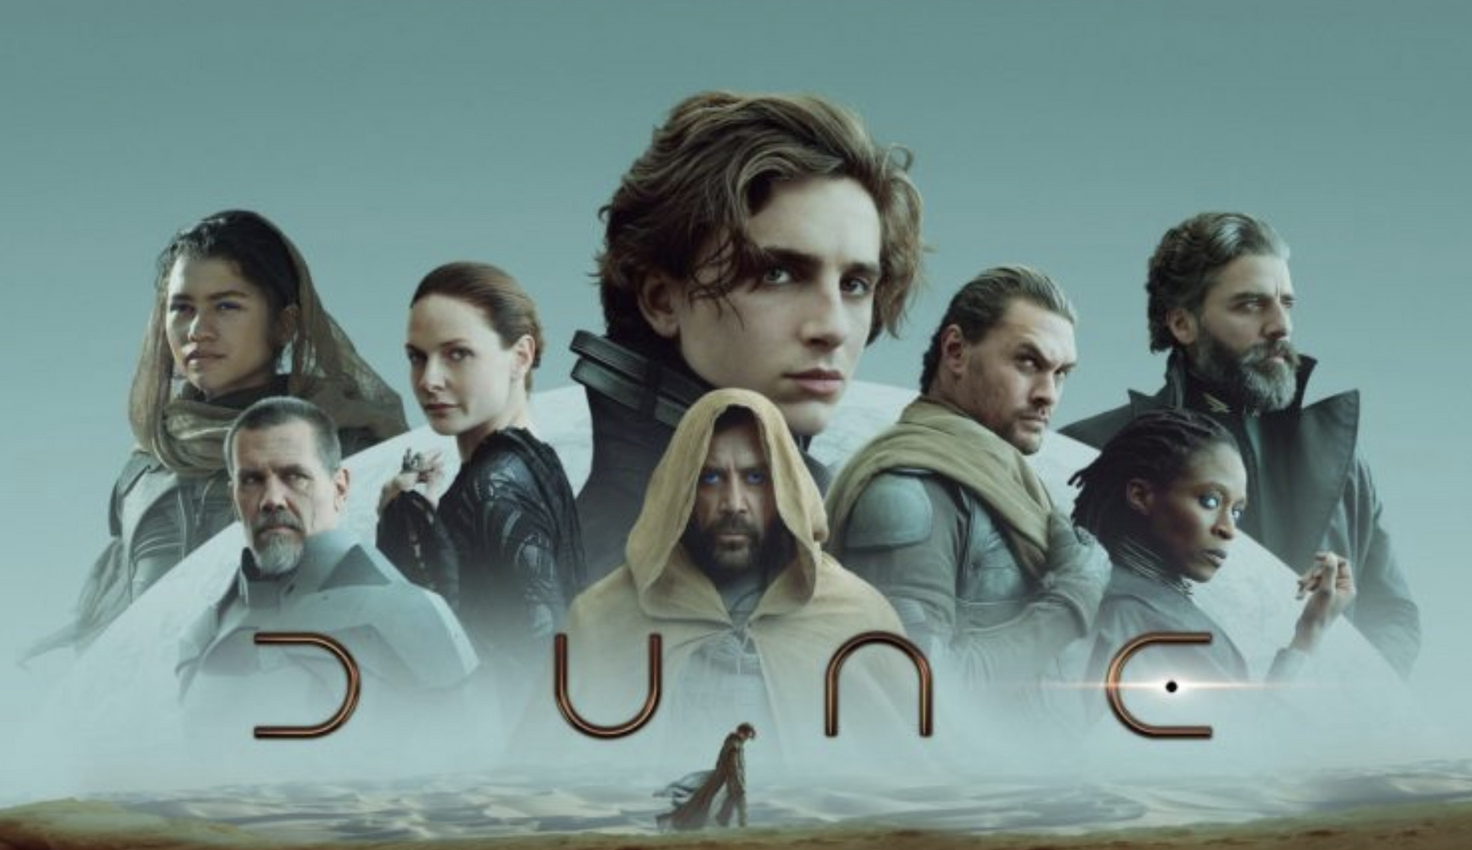 “Dune” Review: Spice Up Your Life